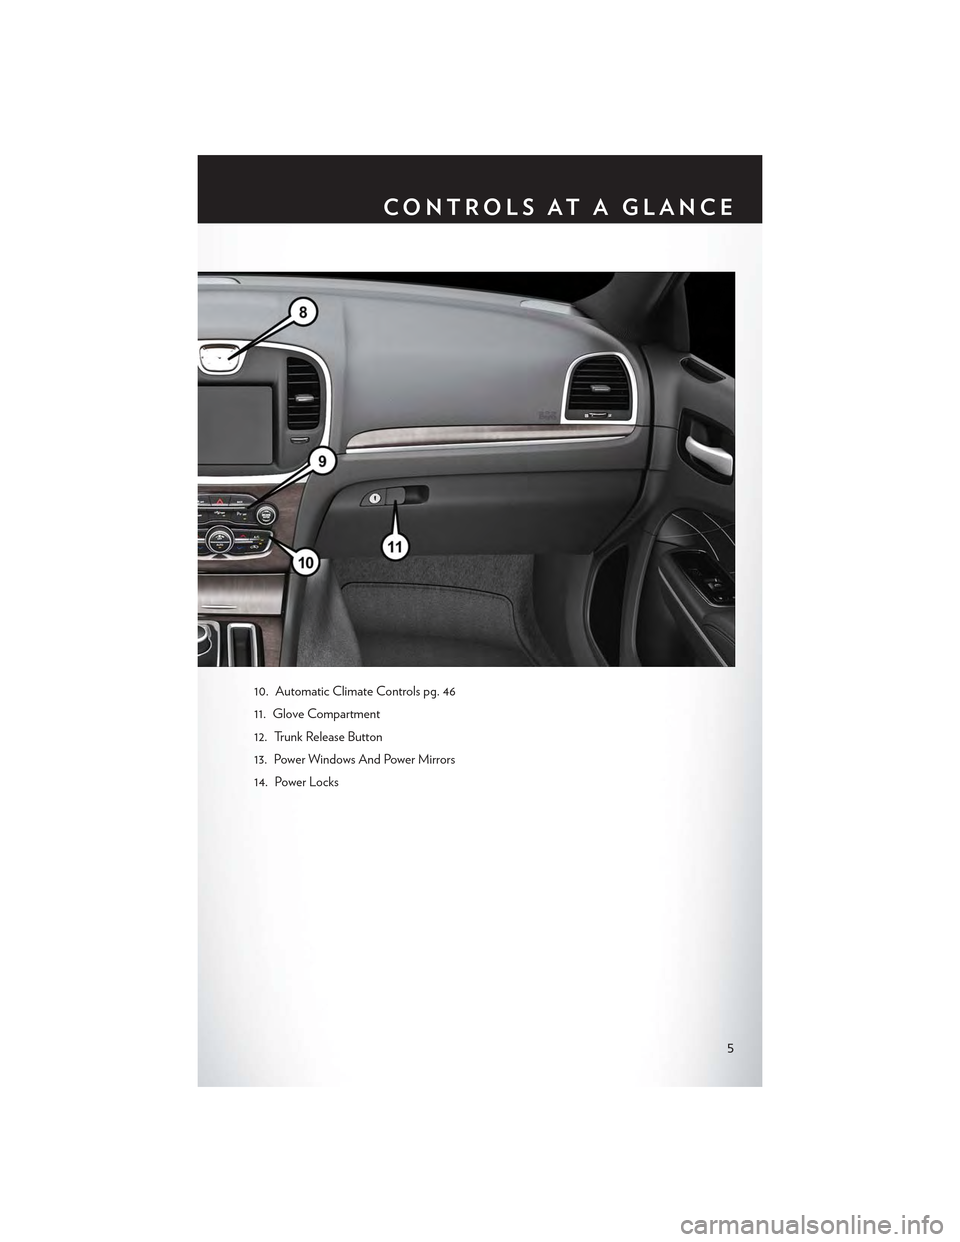 CHRYSLER 300 2015 2.G User Guide 10. Automatic Climate Controls pg. 46
11. Glove Compartment
12. Trunk Release Button
13. Power Windows And Power Mirrors
14. Power Locks
CONTROLS AT A GLANCE
5 